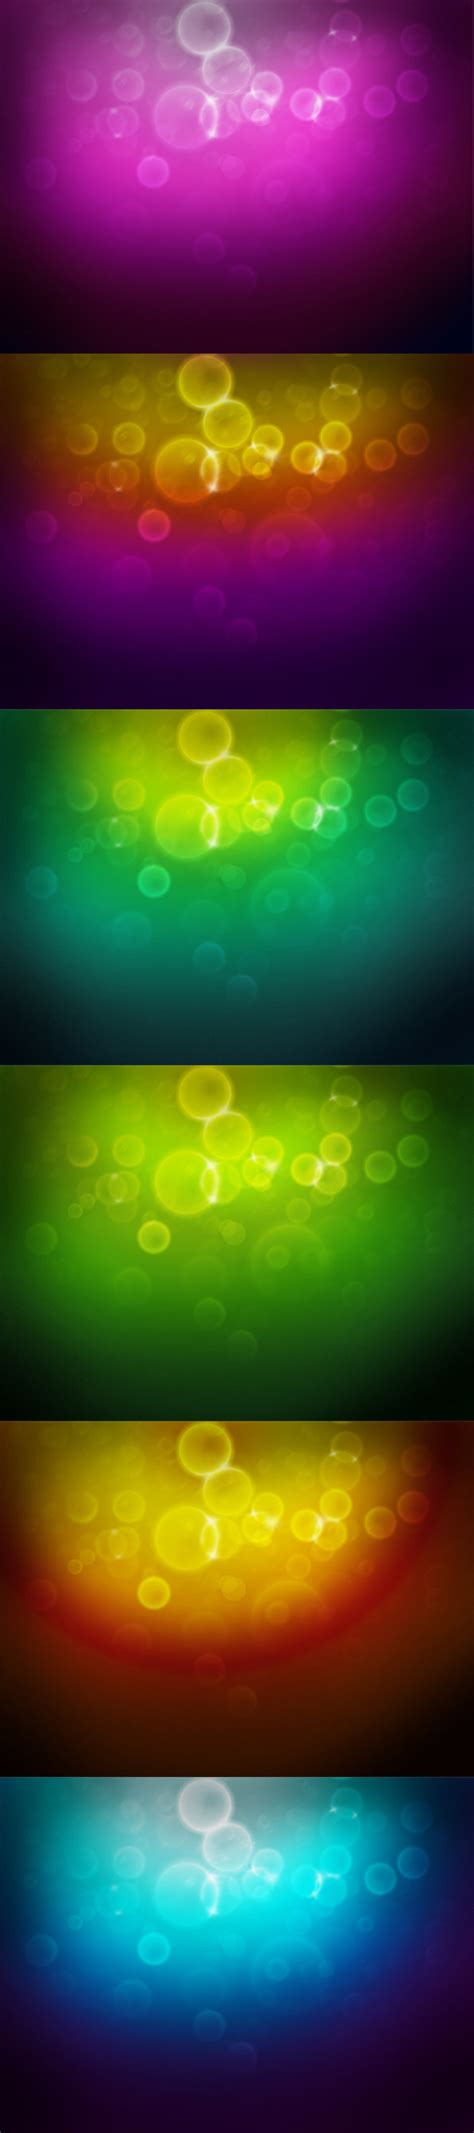 Abstract Bokeh Background Set Free Psd Files